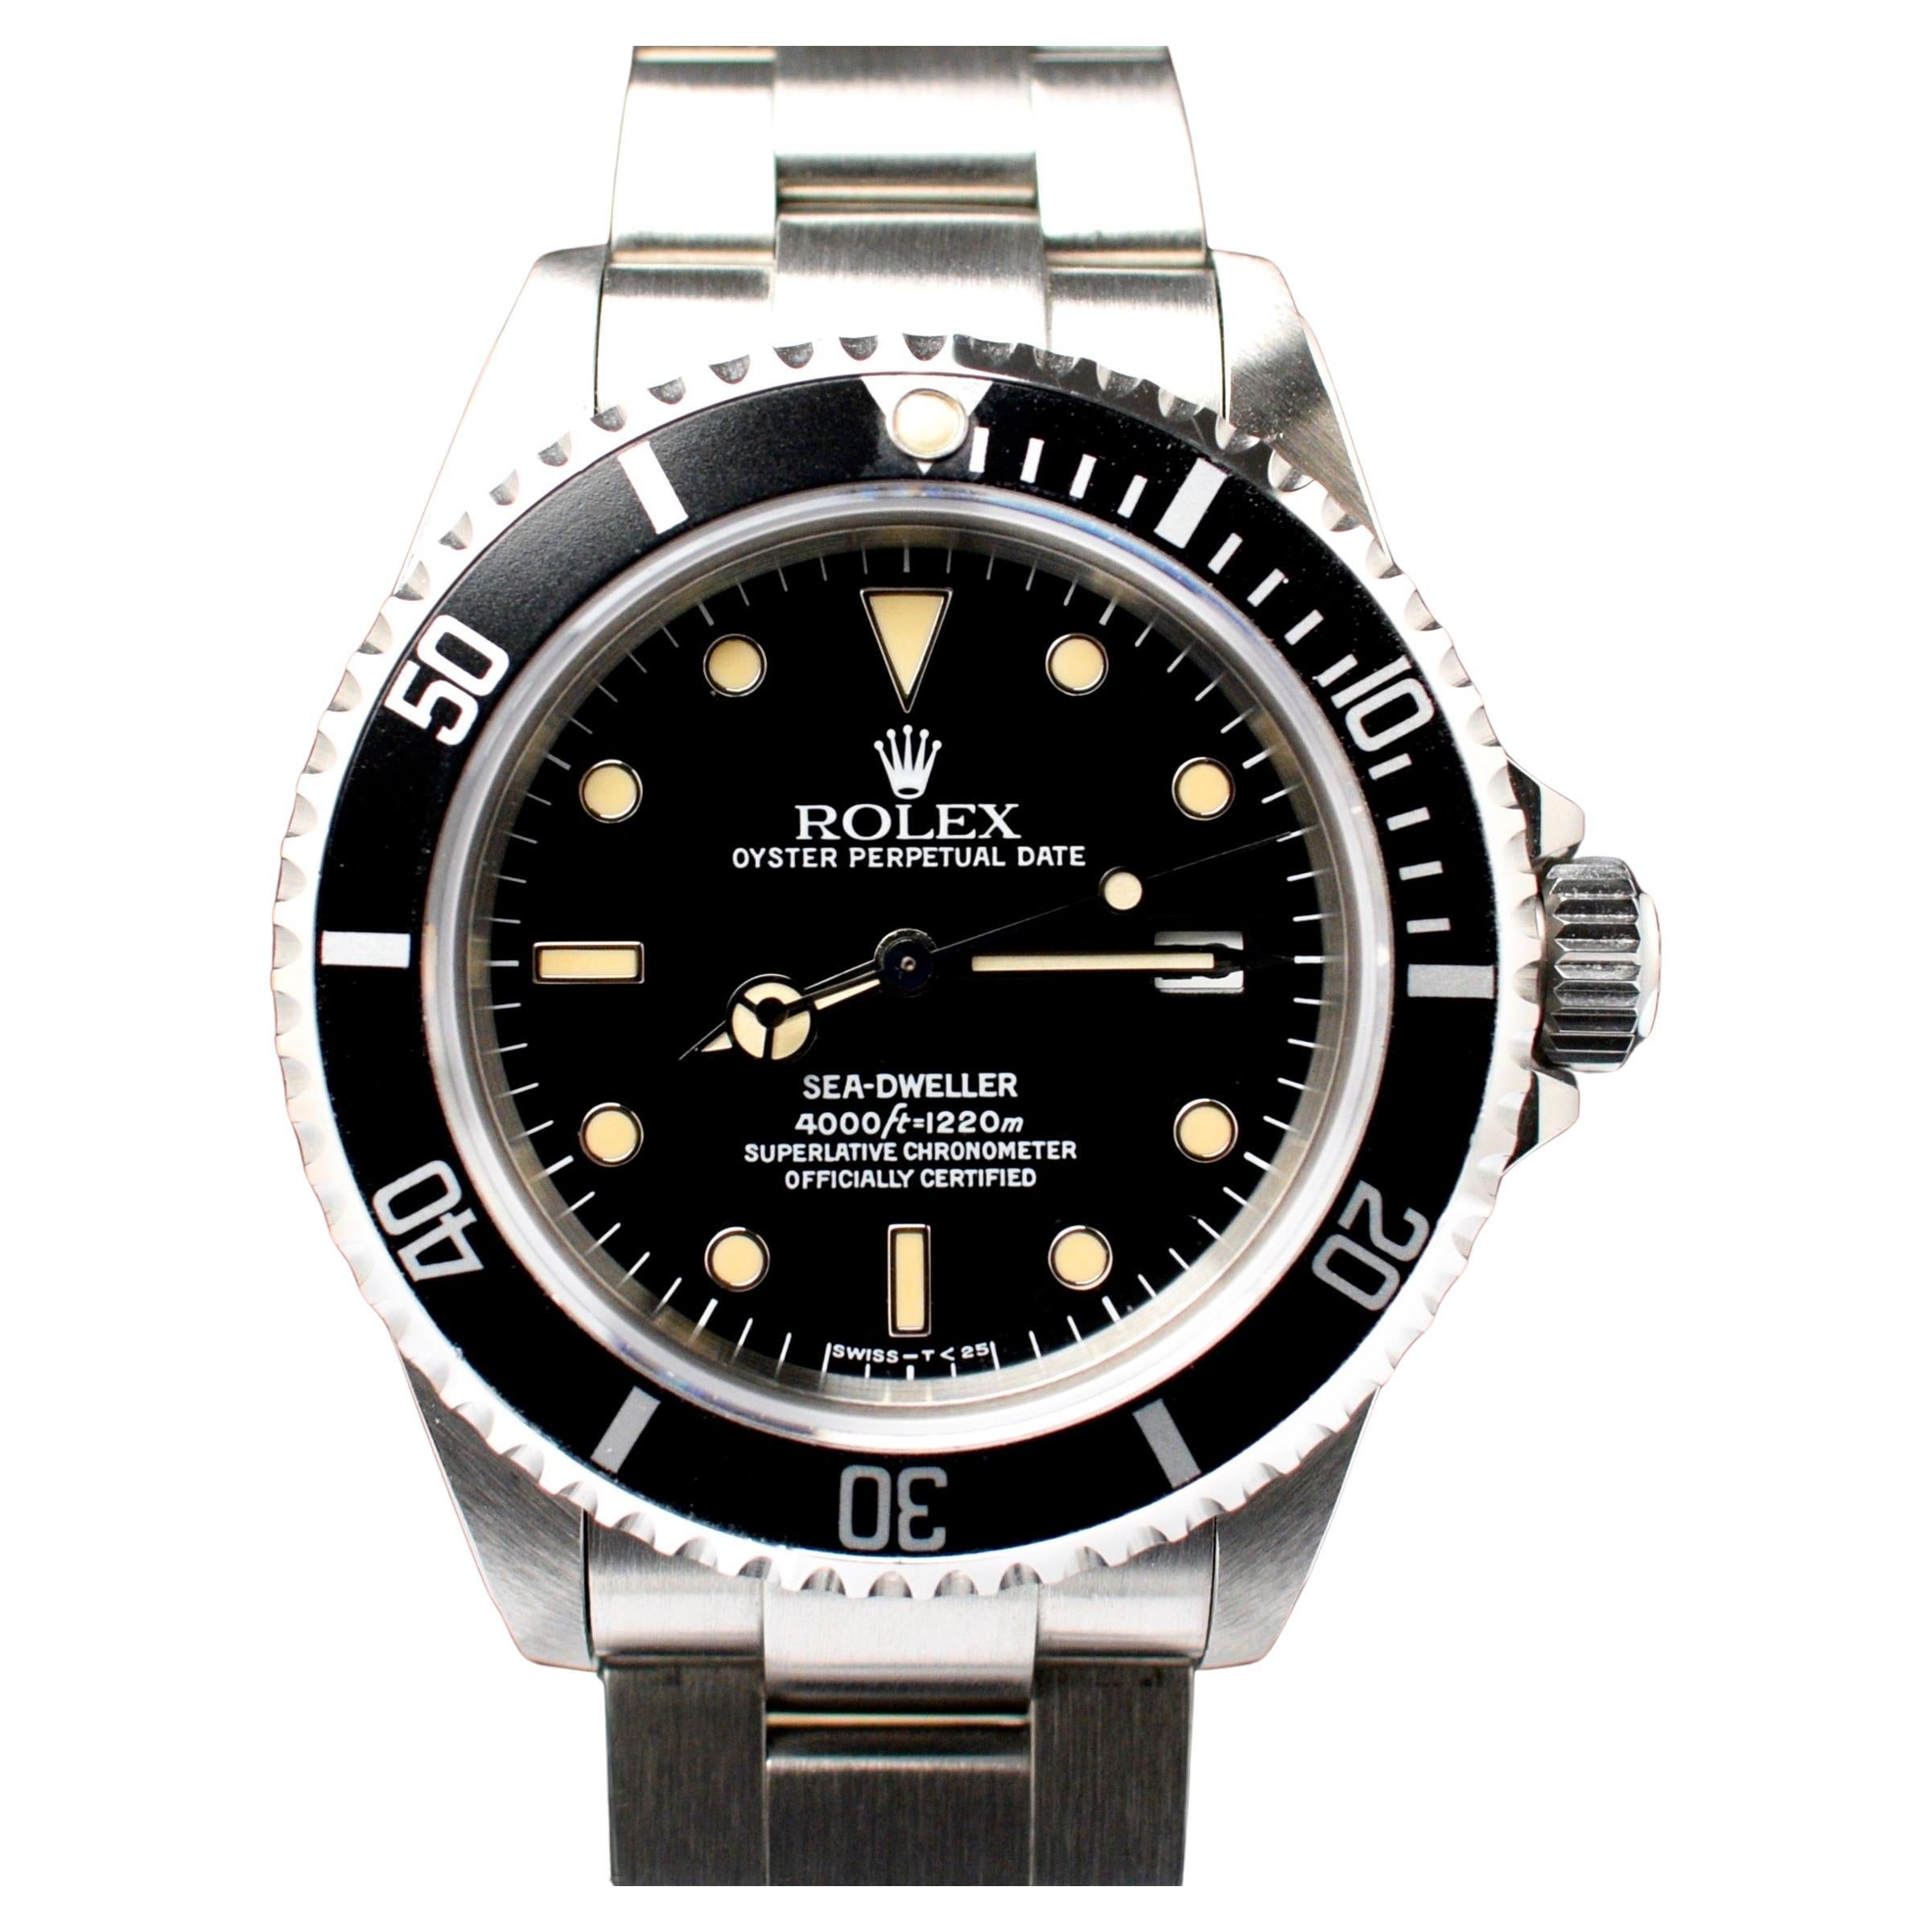 Where can I buy a Rolex watch?